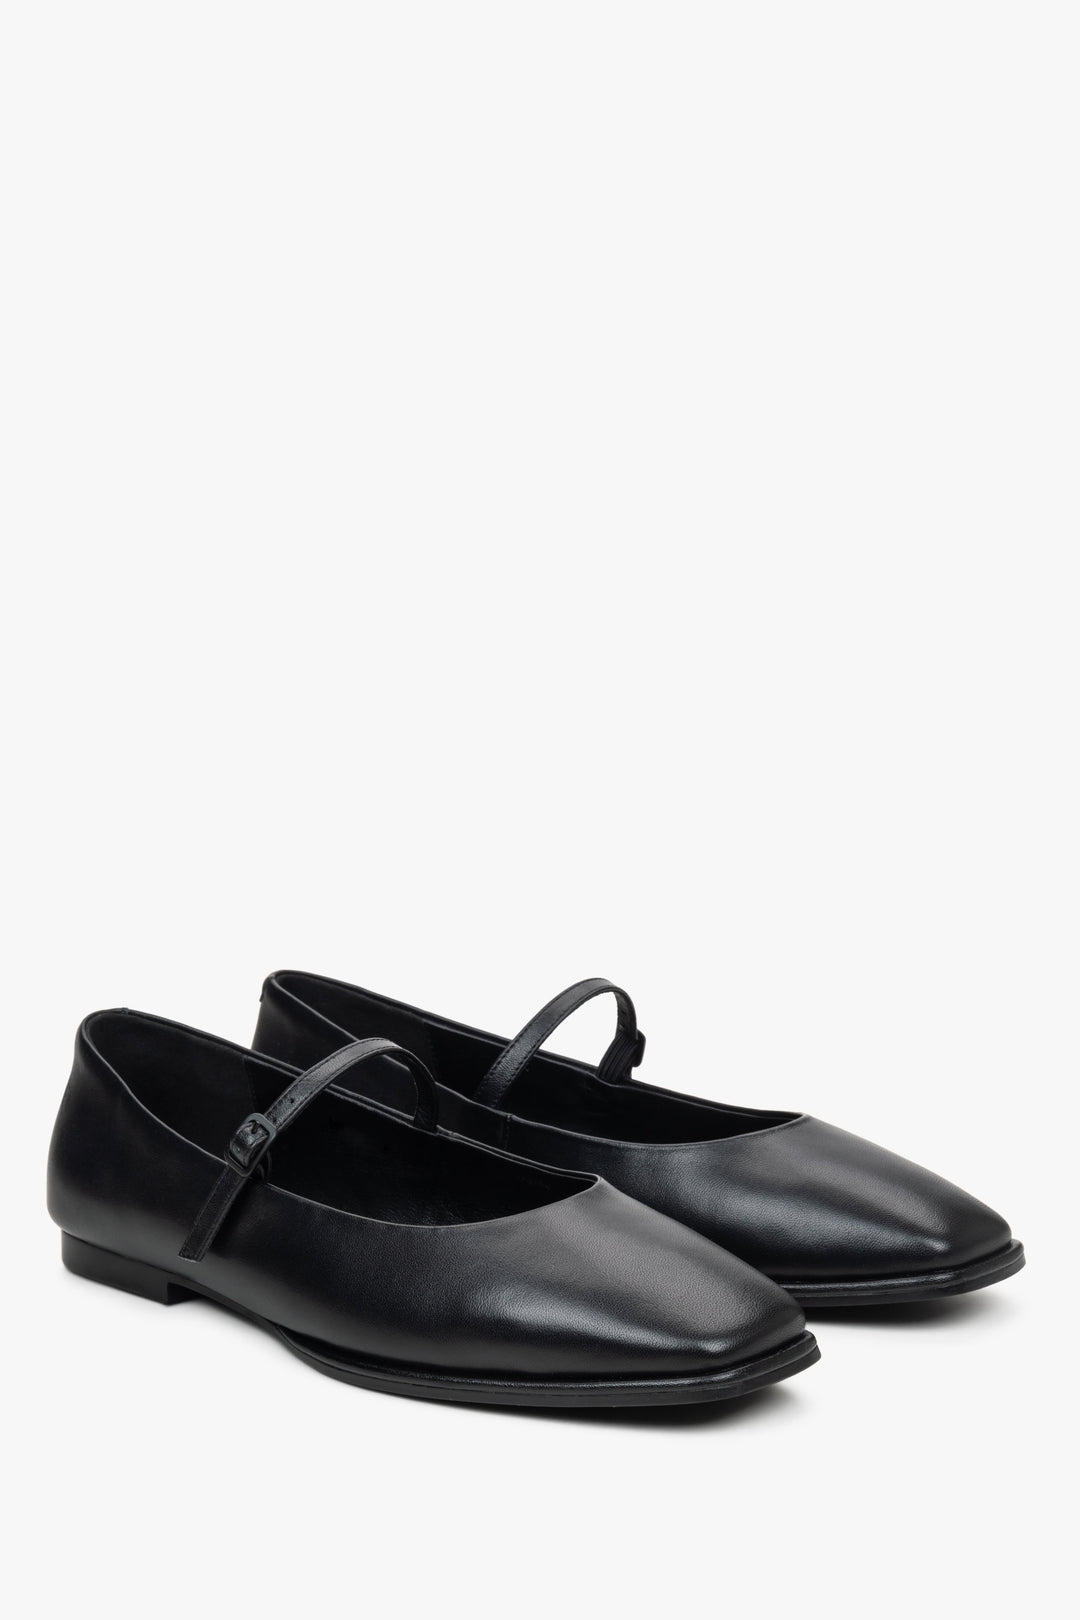 Women's black ballet flats with a buckle by Estro.